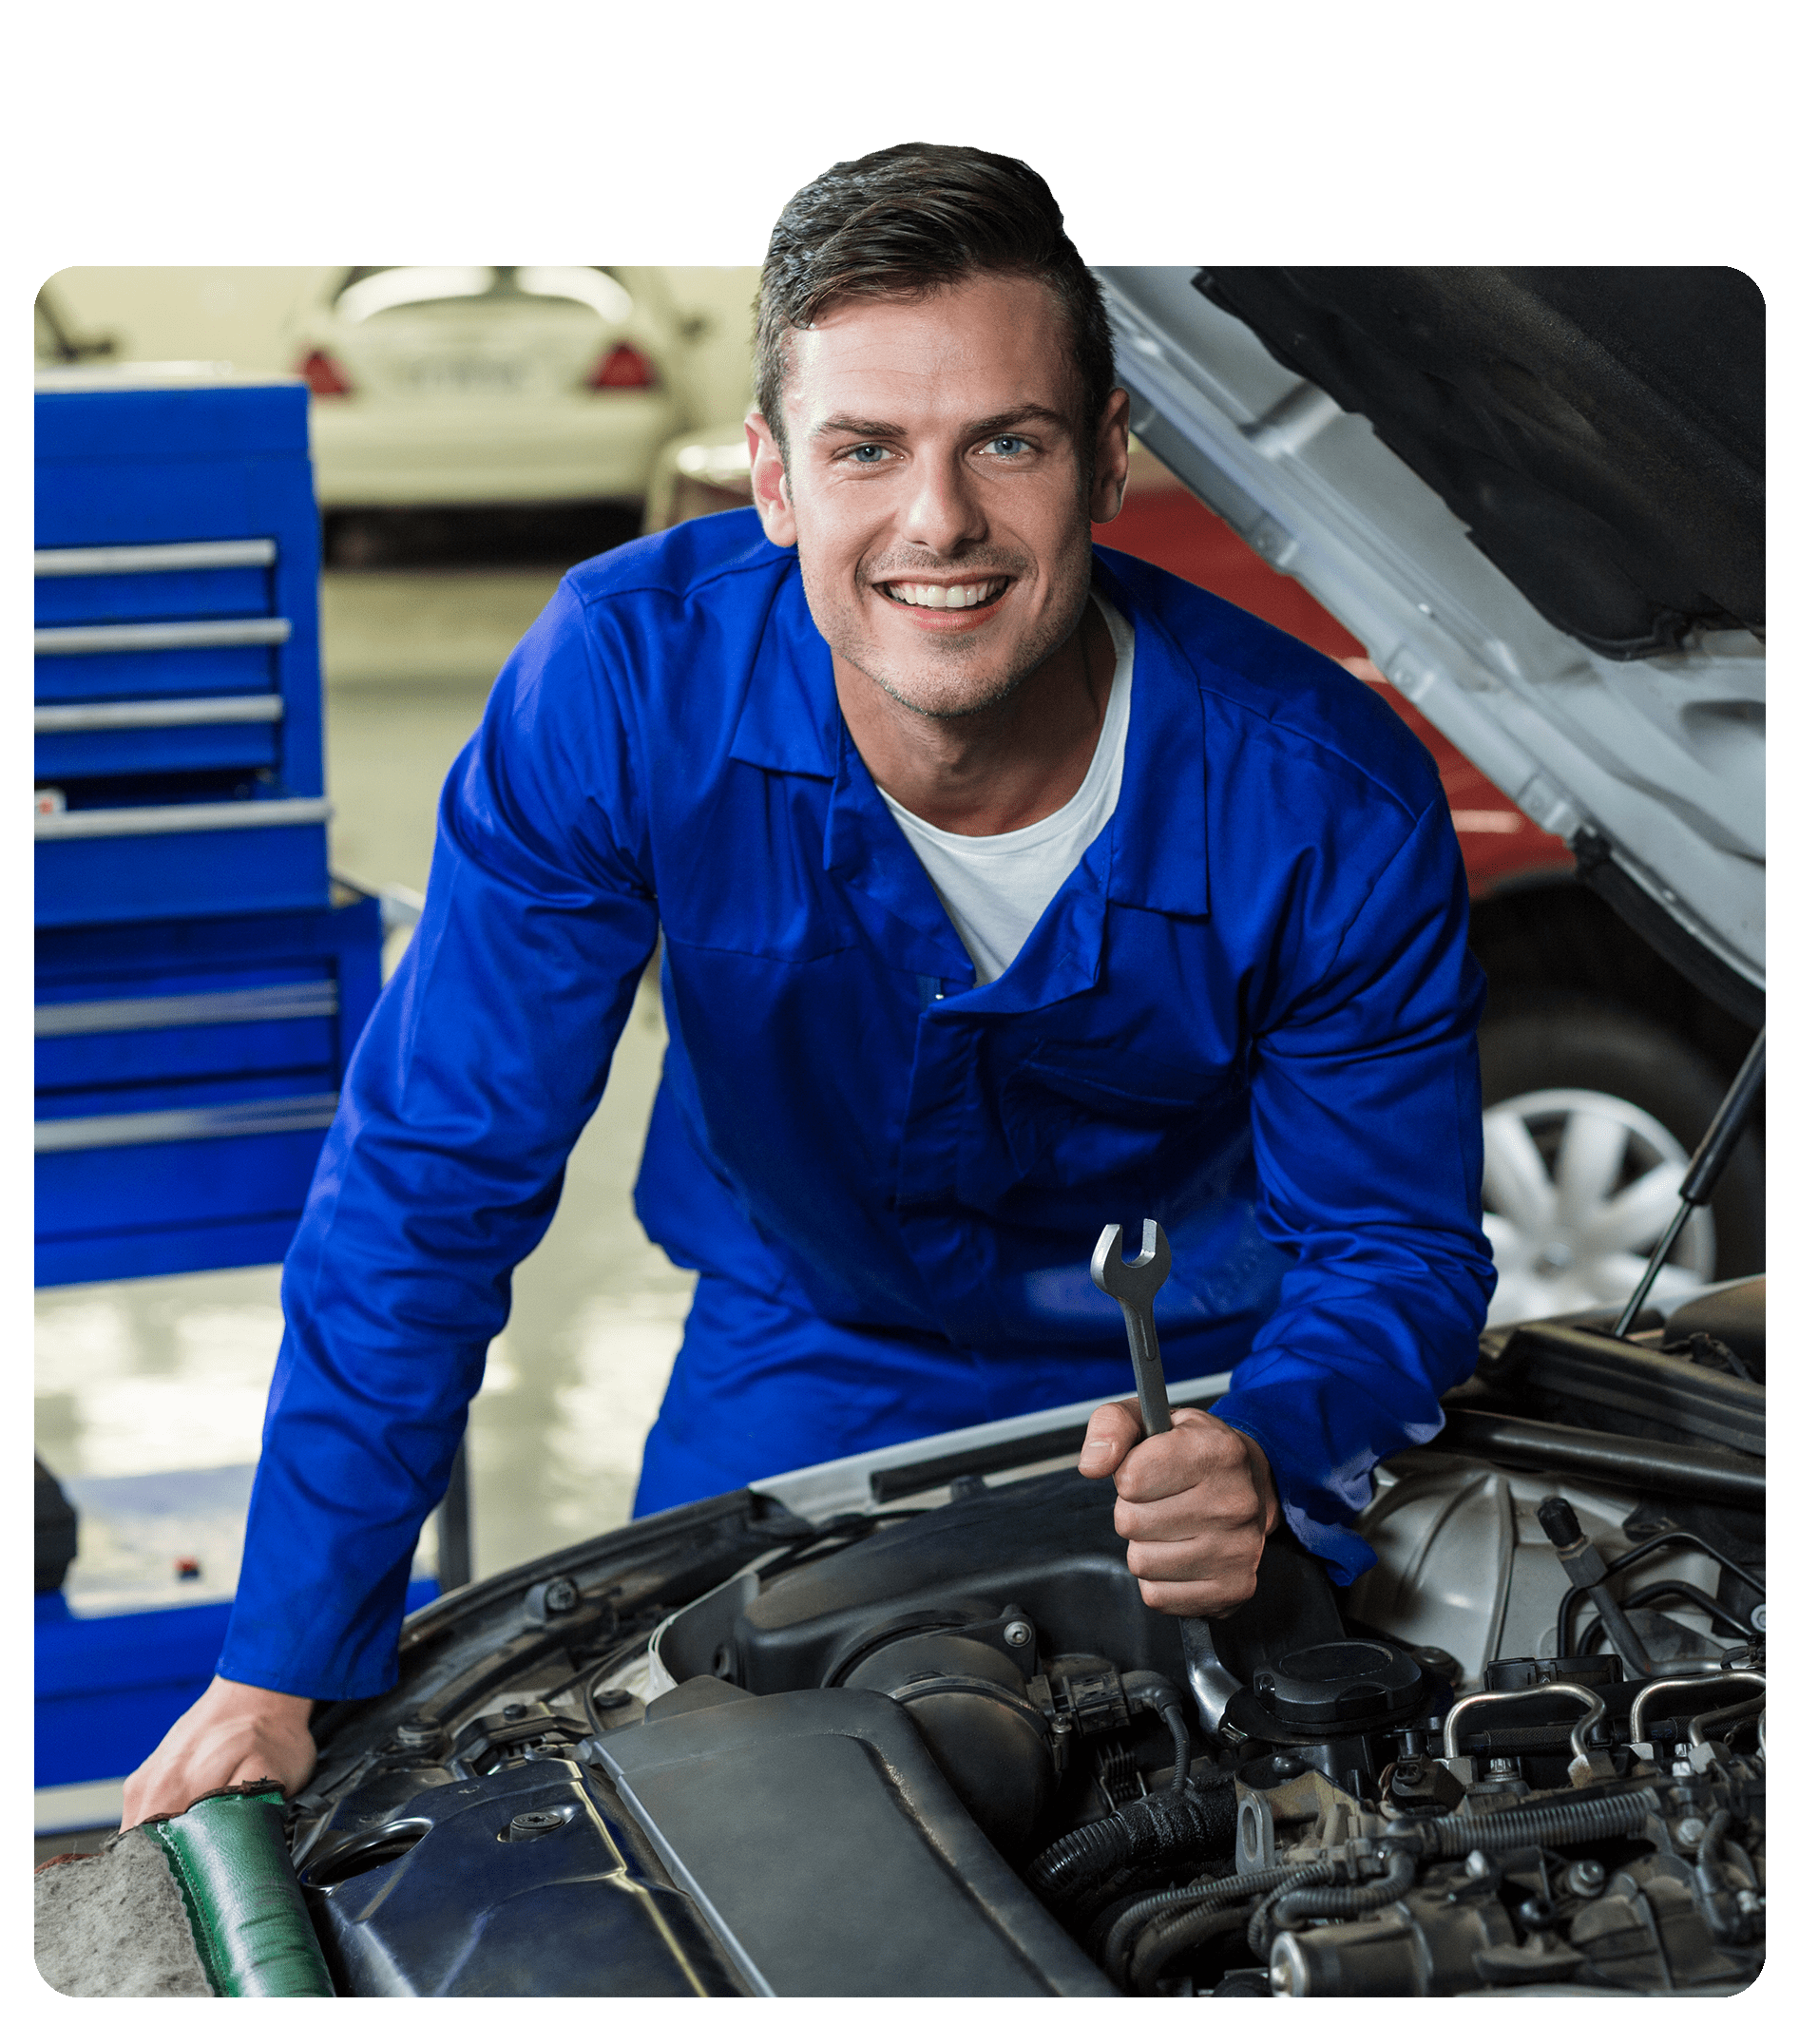 Mechanic in blue overalls, leaning against a cars engine, holding a spanner and smiling